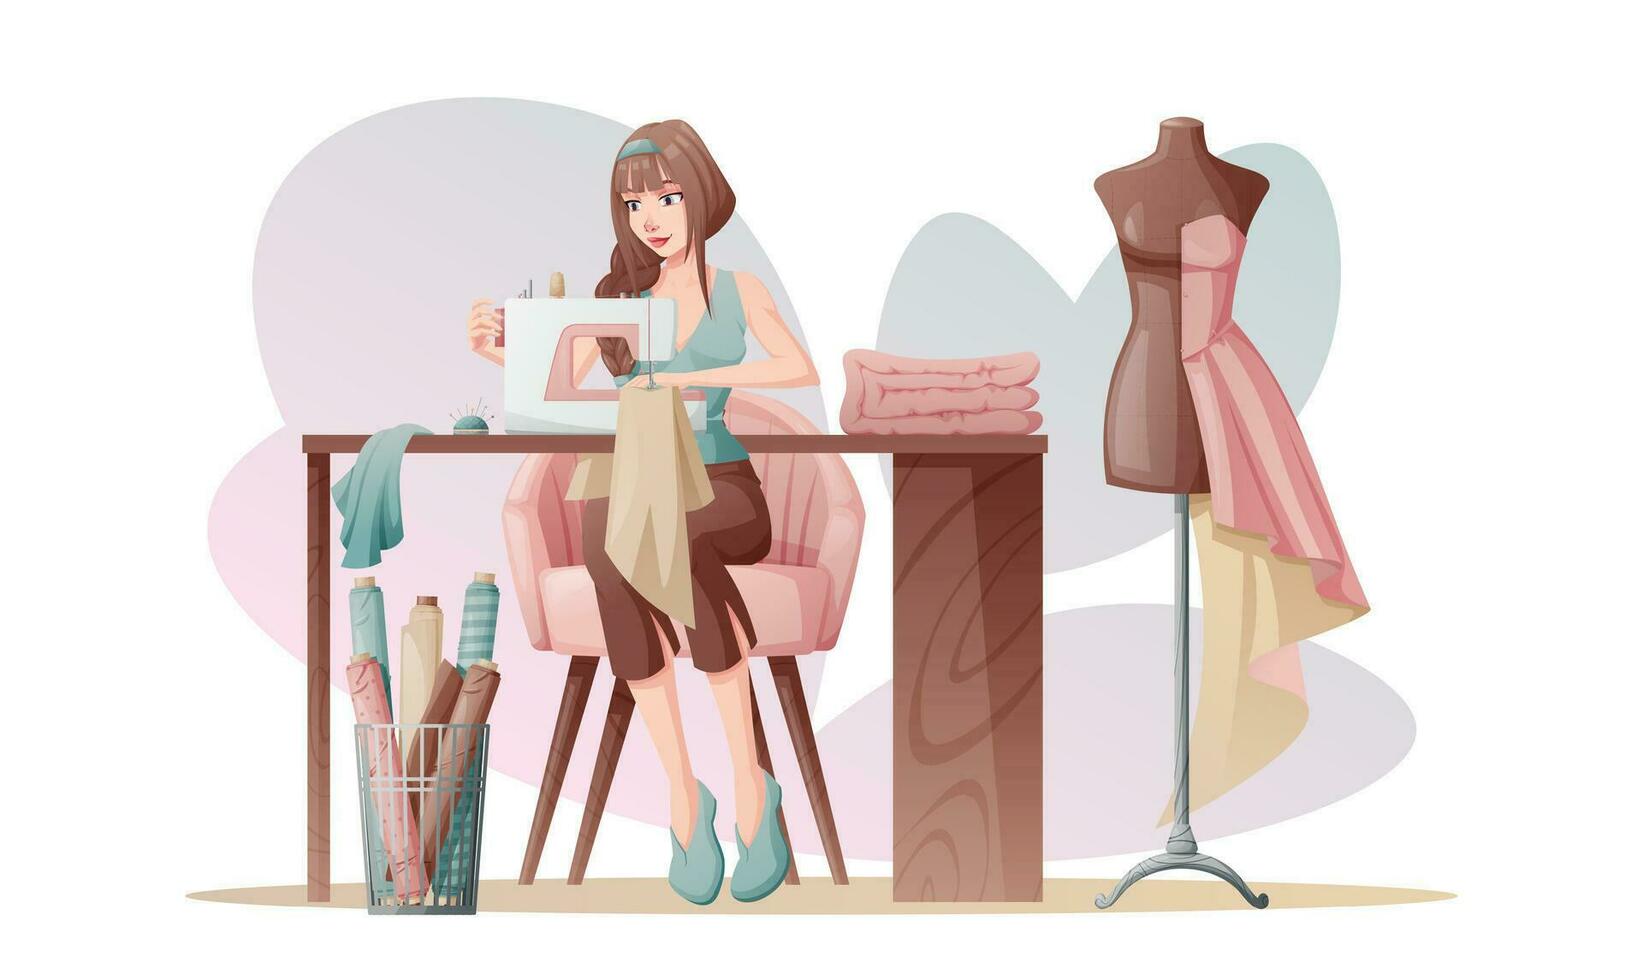 Woman seamstress works on a sewing machine. Seamstress work, tailoring. Vector illustration of a seamstress in the workplace